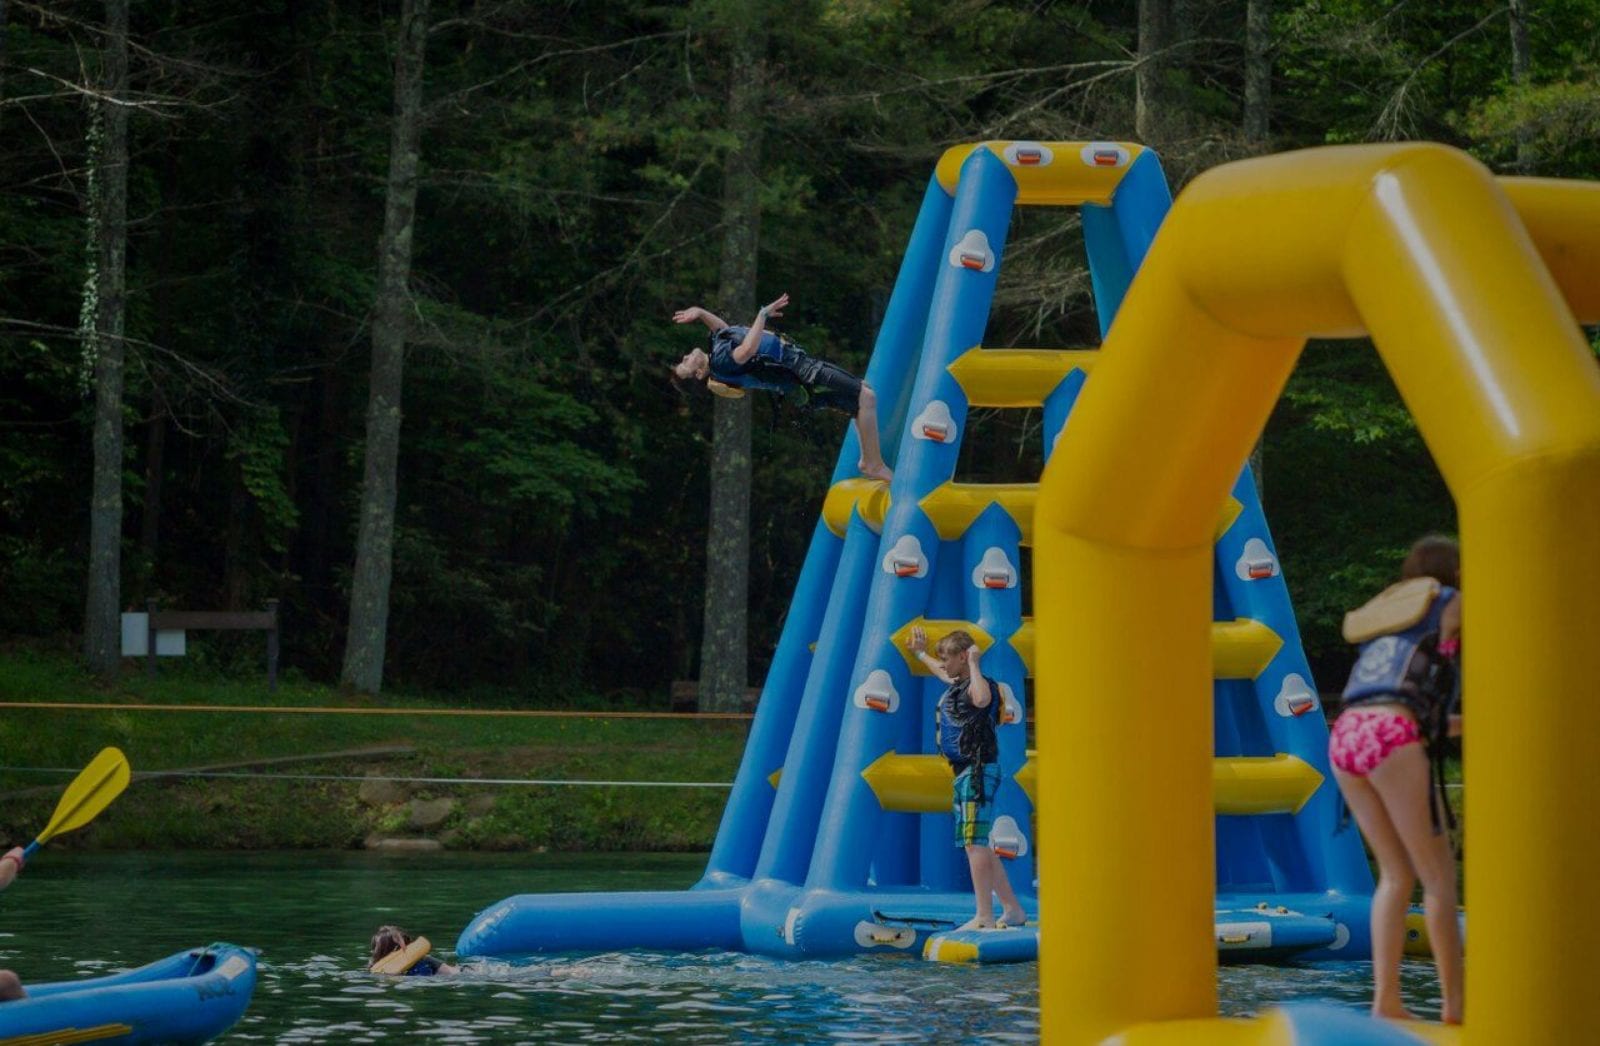 A young man leaps from an inflatable tower into the lake in ACE's Water Park in West Virginia.